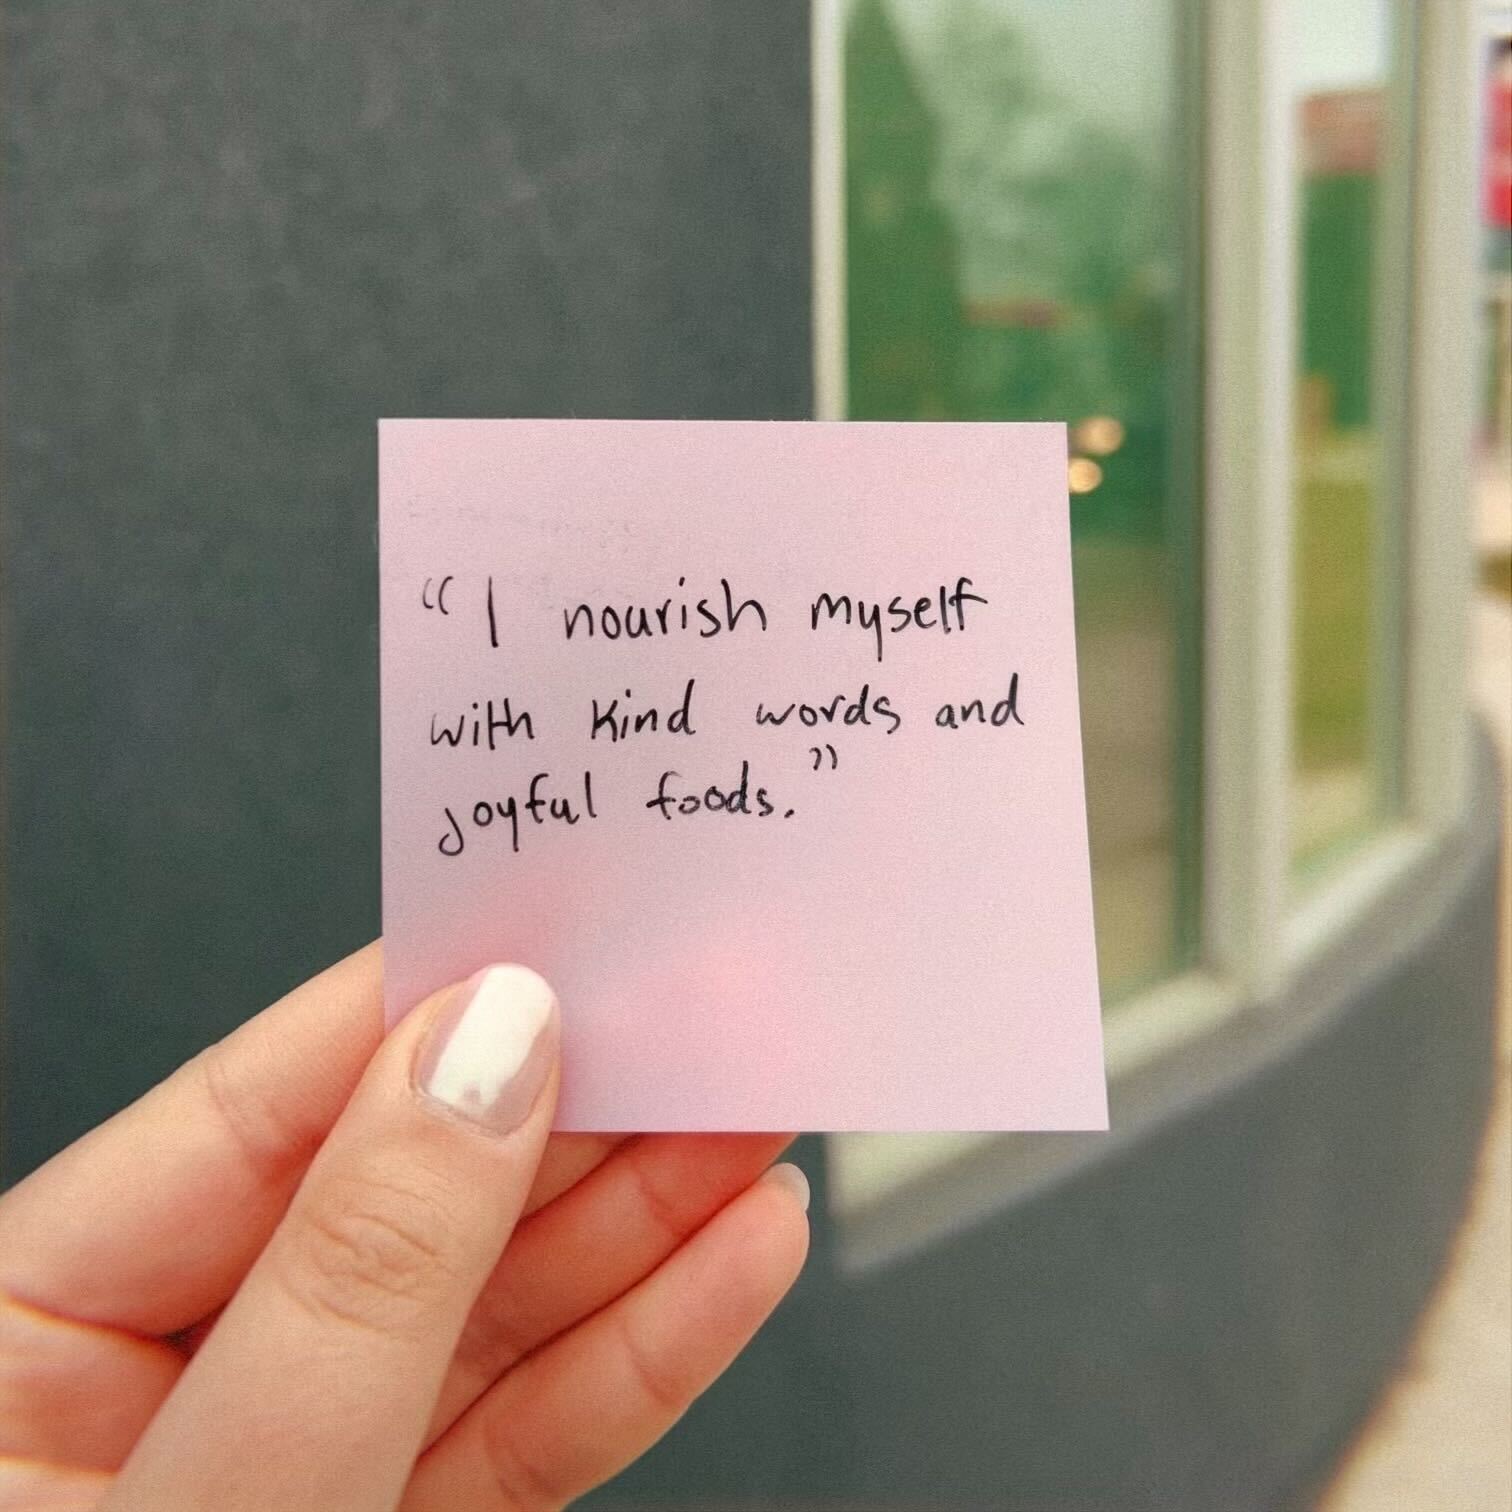 A sticky note held up reading "I nourish myself with kind words and joyful foods".